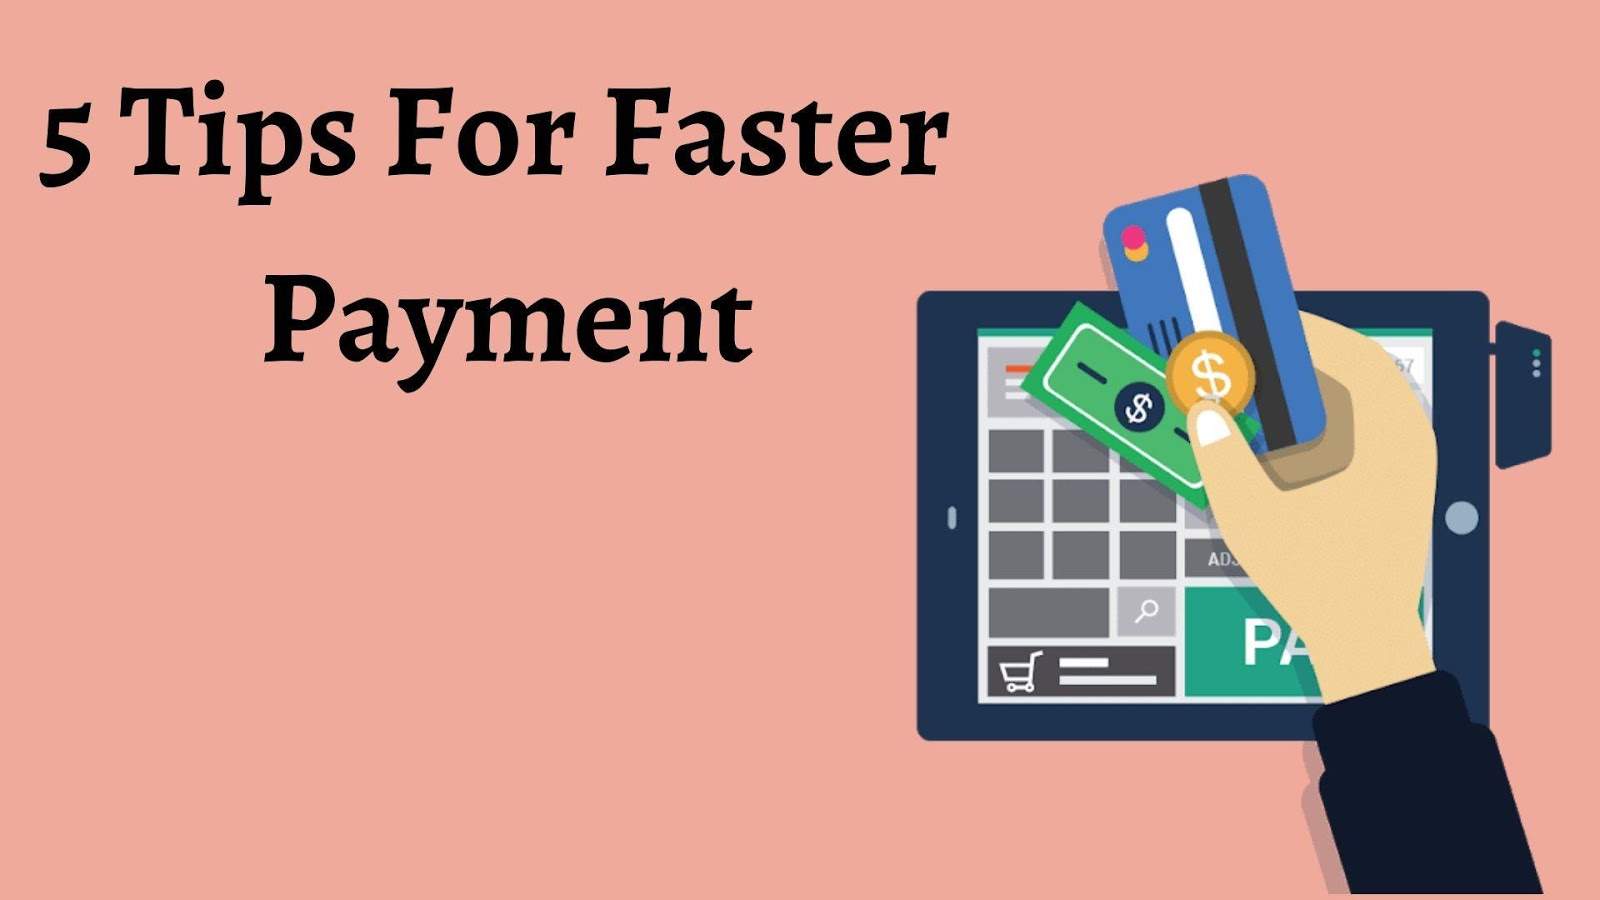 Find Top 5 Tips for Faster Invoice Payment